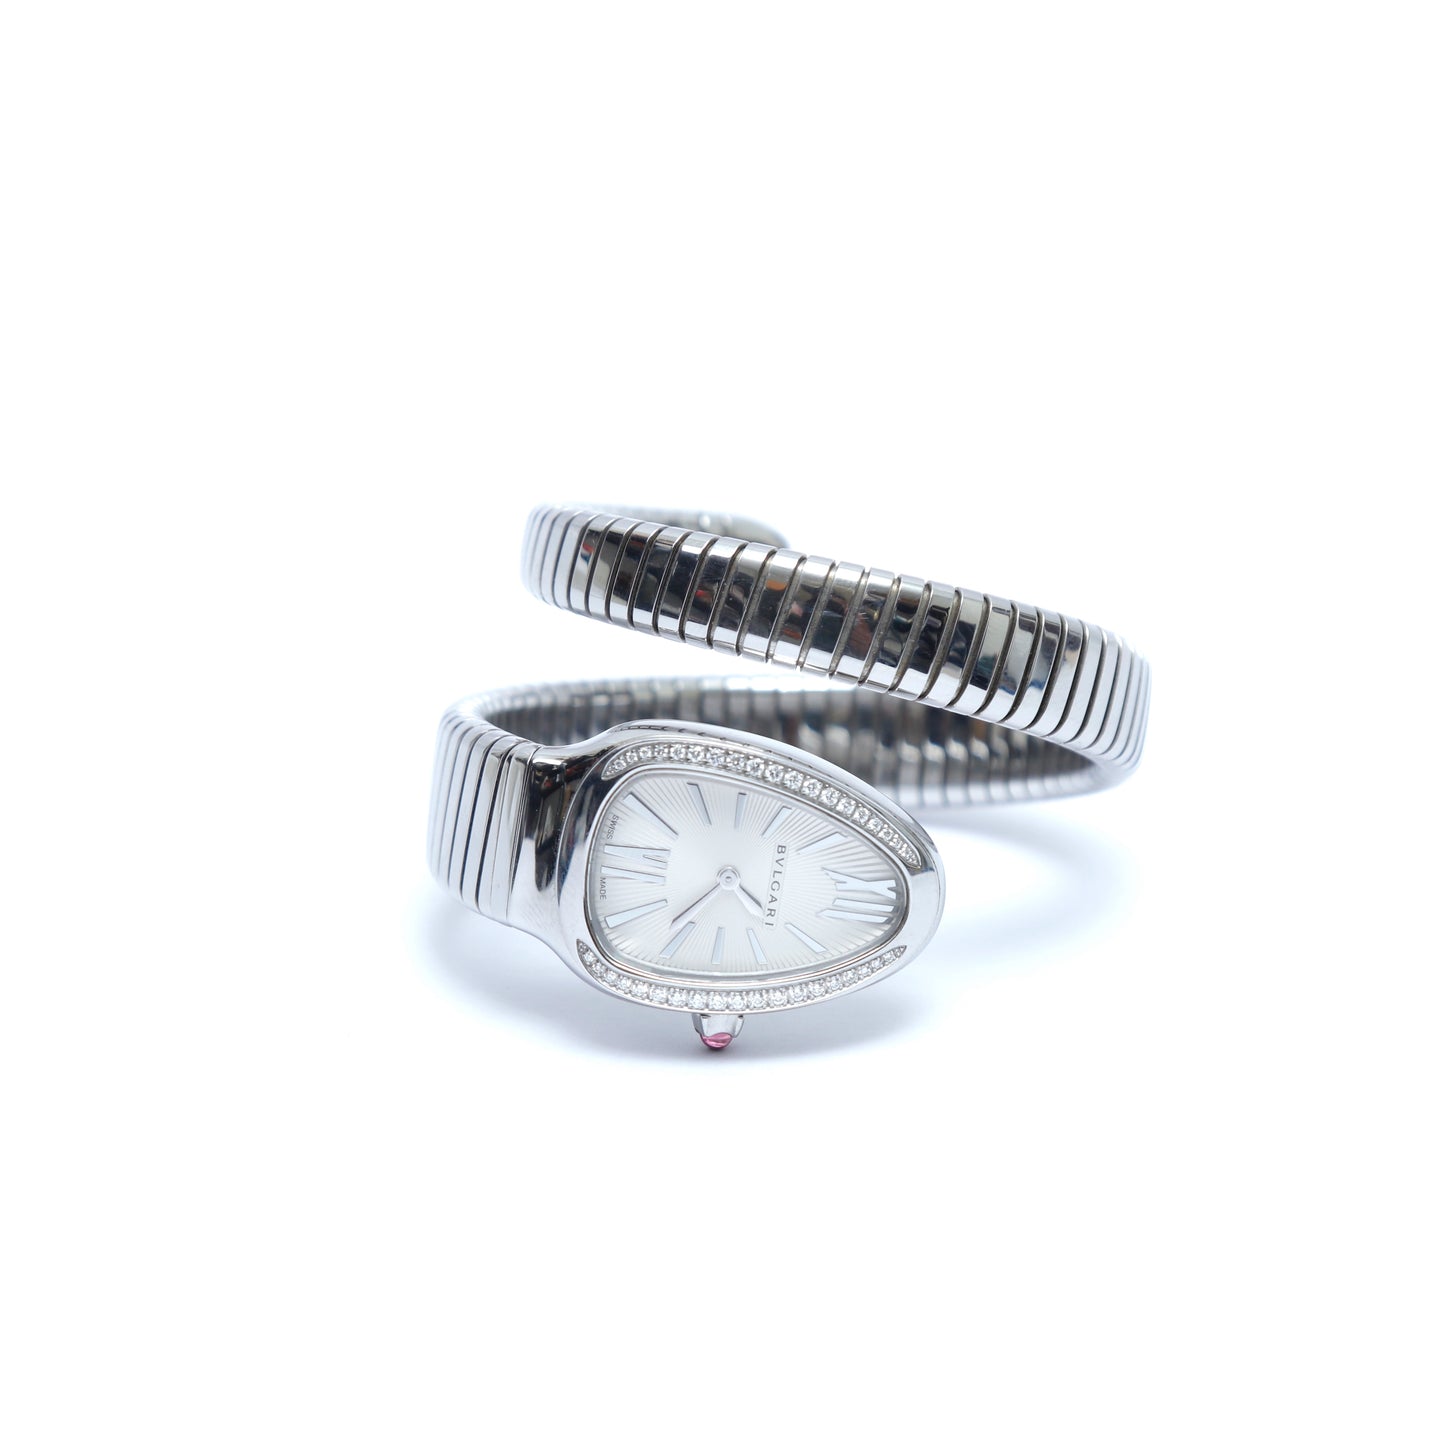 Bvlgari Tubogas Serpenti Watch in Stainless Steel with Diamonds